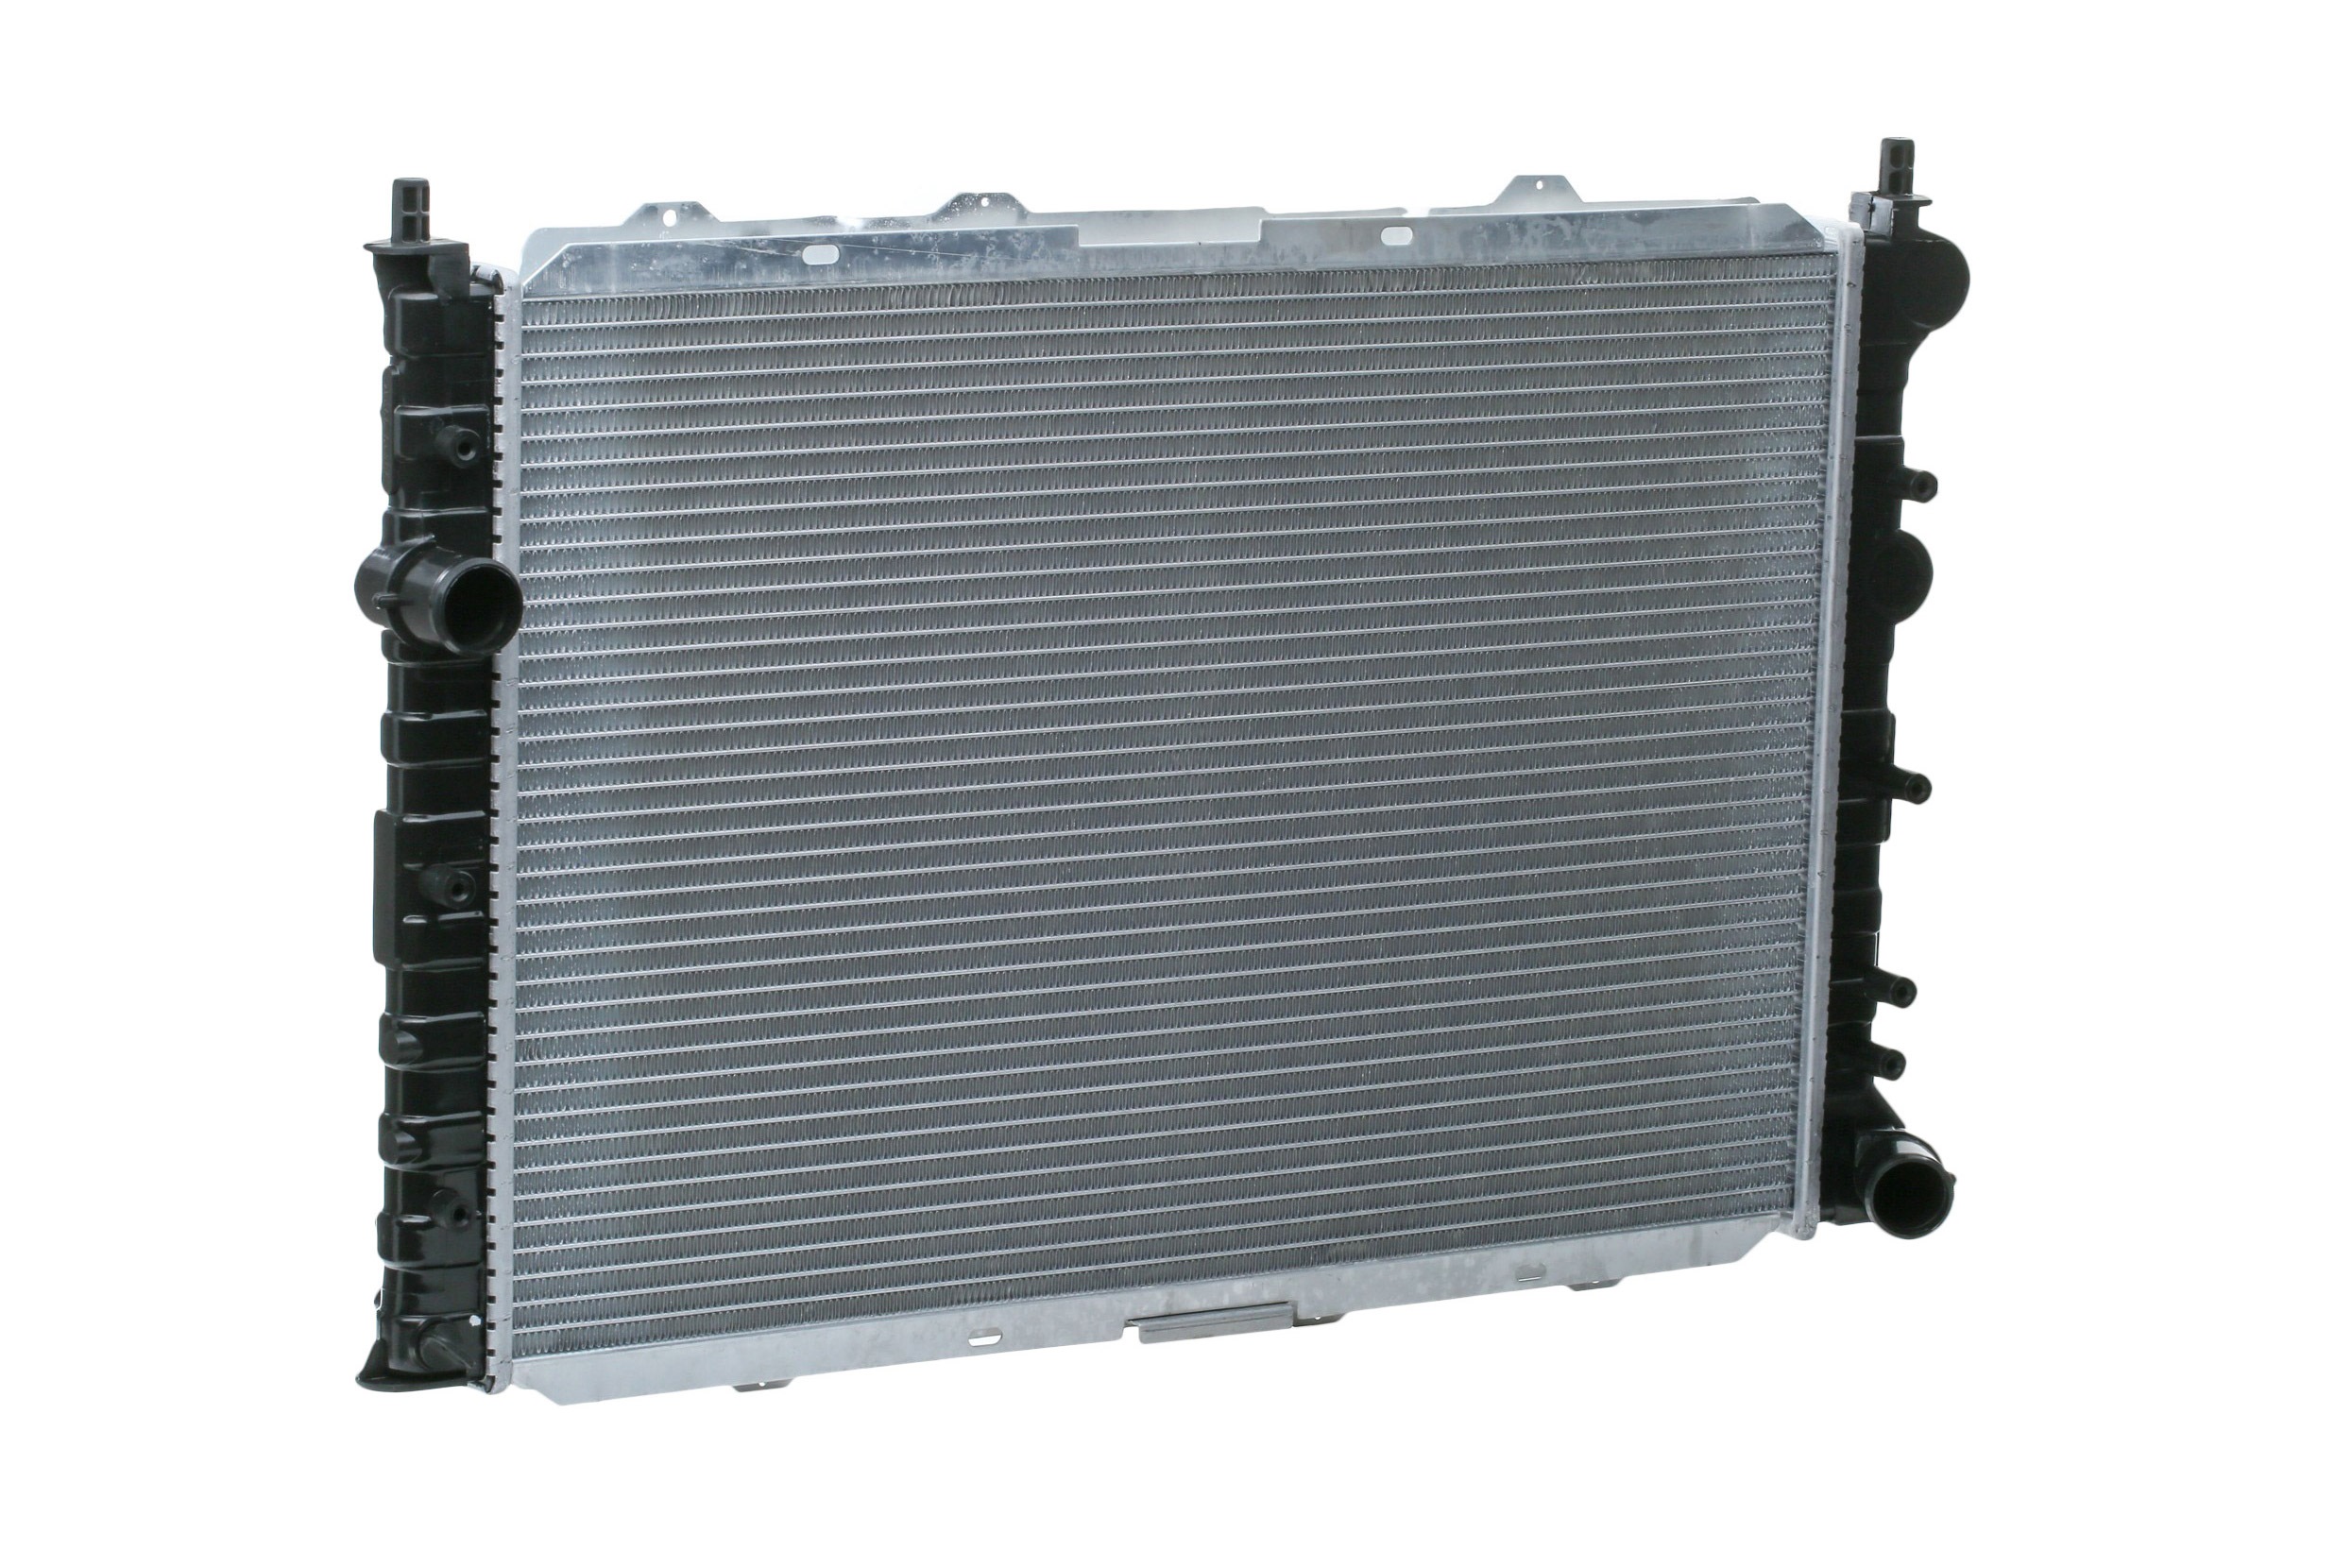 STARK SKRD-0120188 Engine radiator Aluminium, Plastic, for vehicles with/without air conditioning, Manual Transmission, Mechanically jointed cooling fins